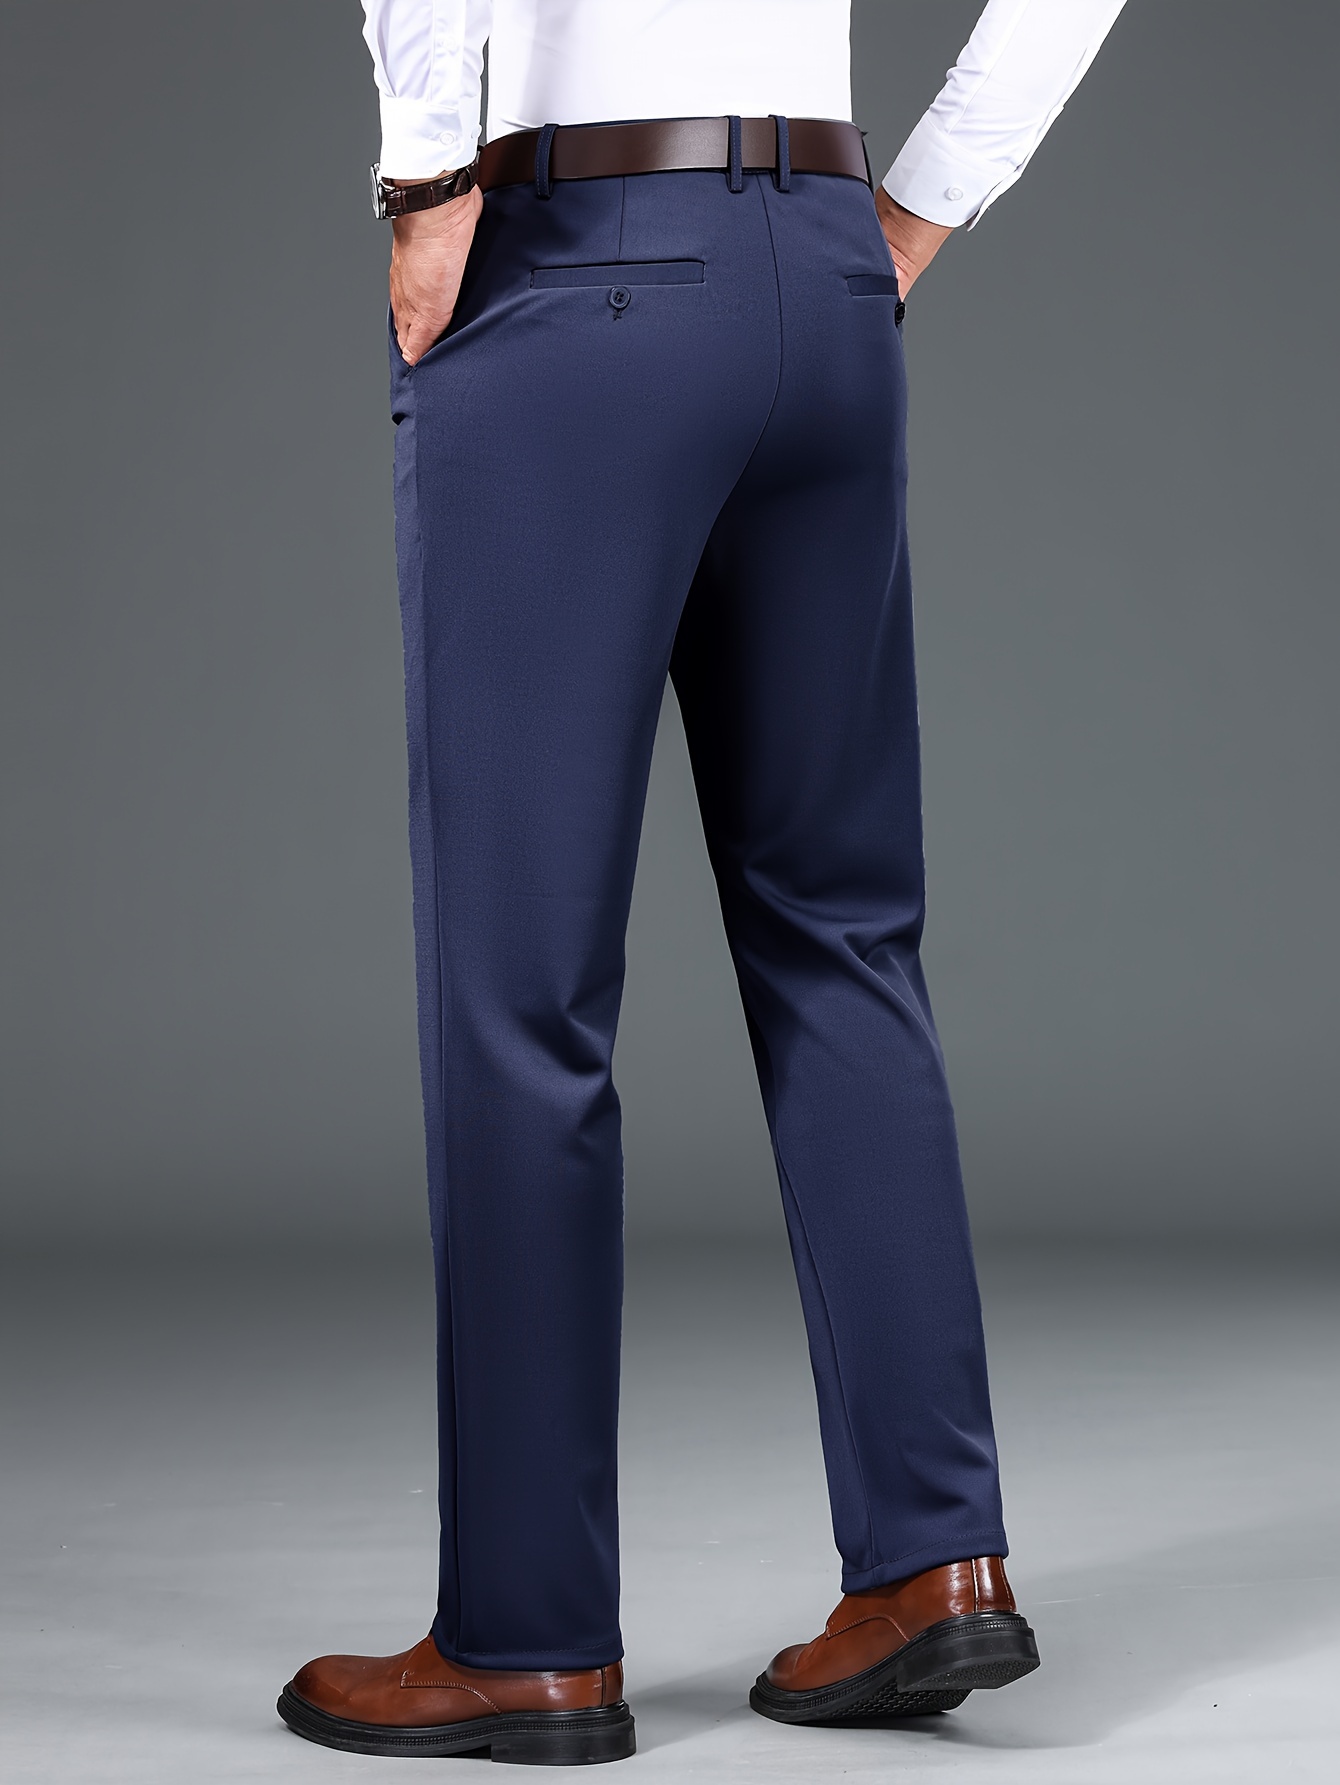 Women's Trousers Spring Summer Stretch Waist Cotton Pants Middle